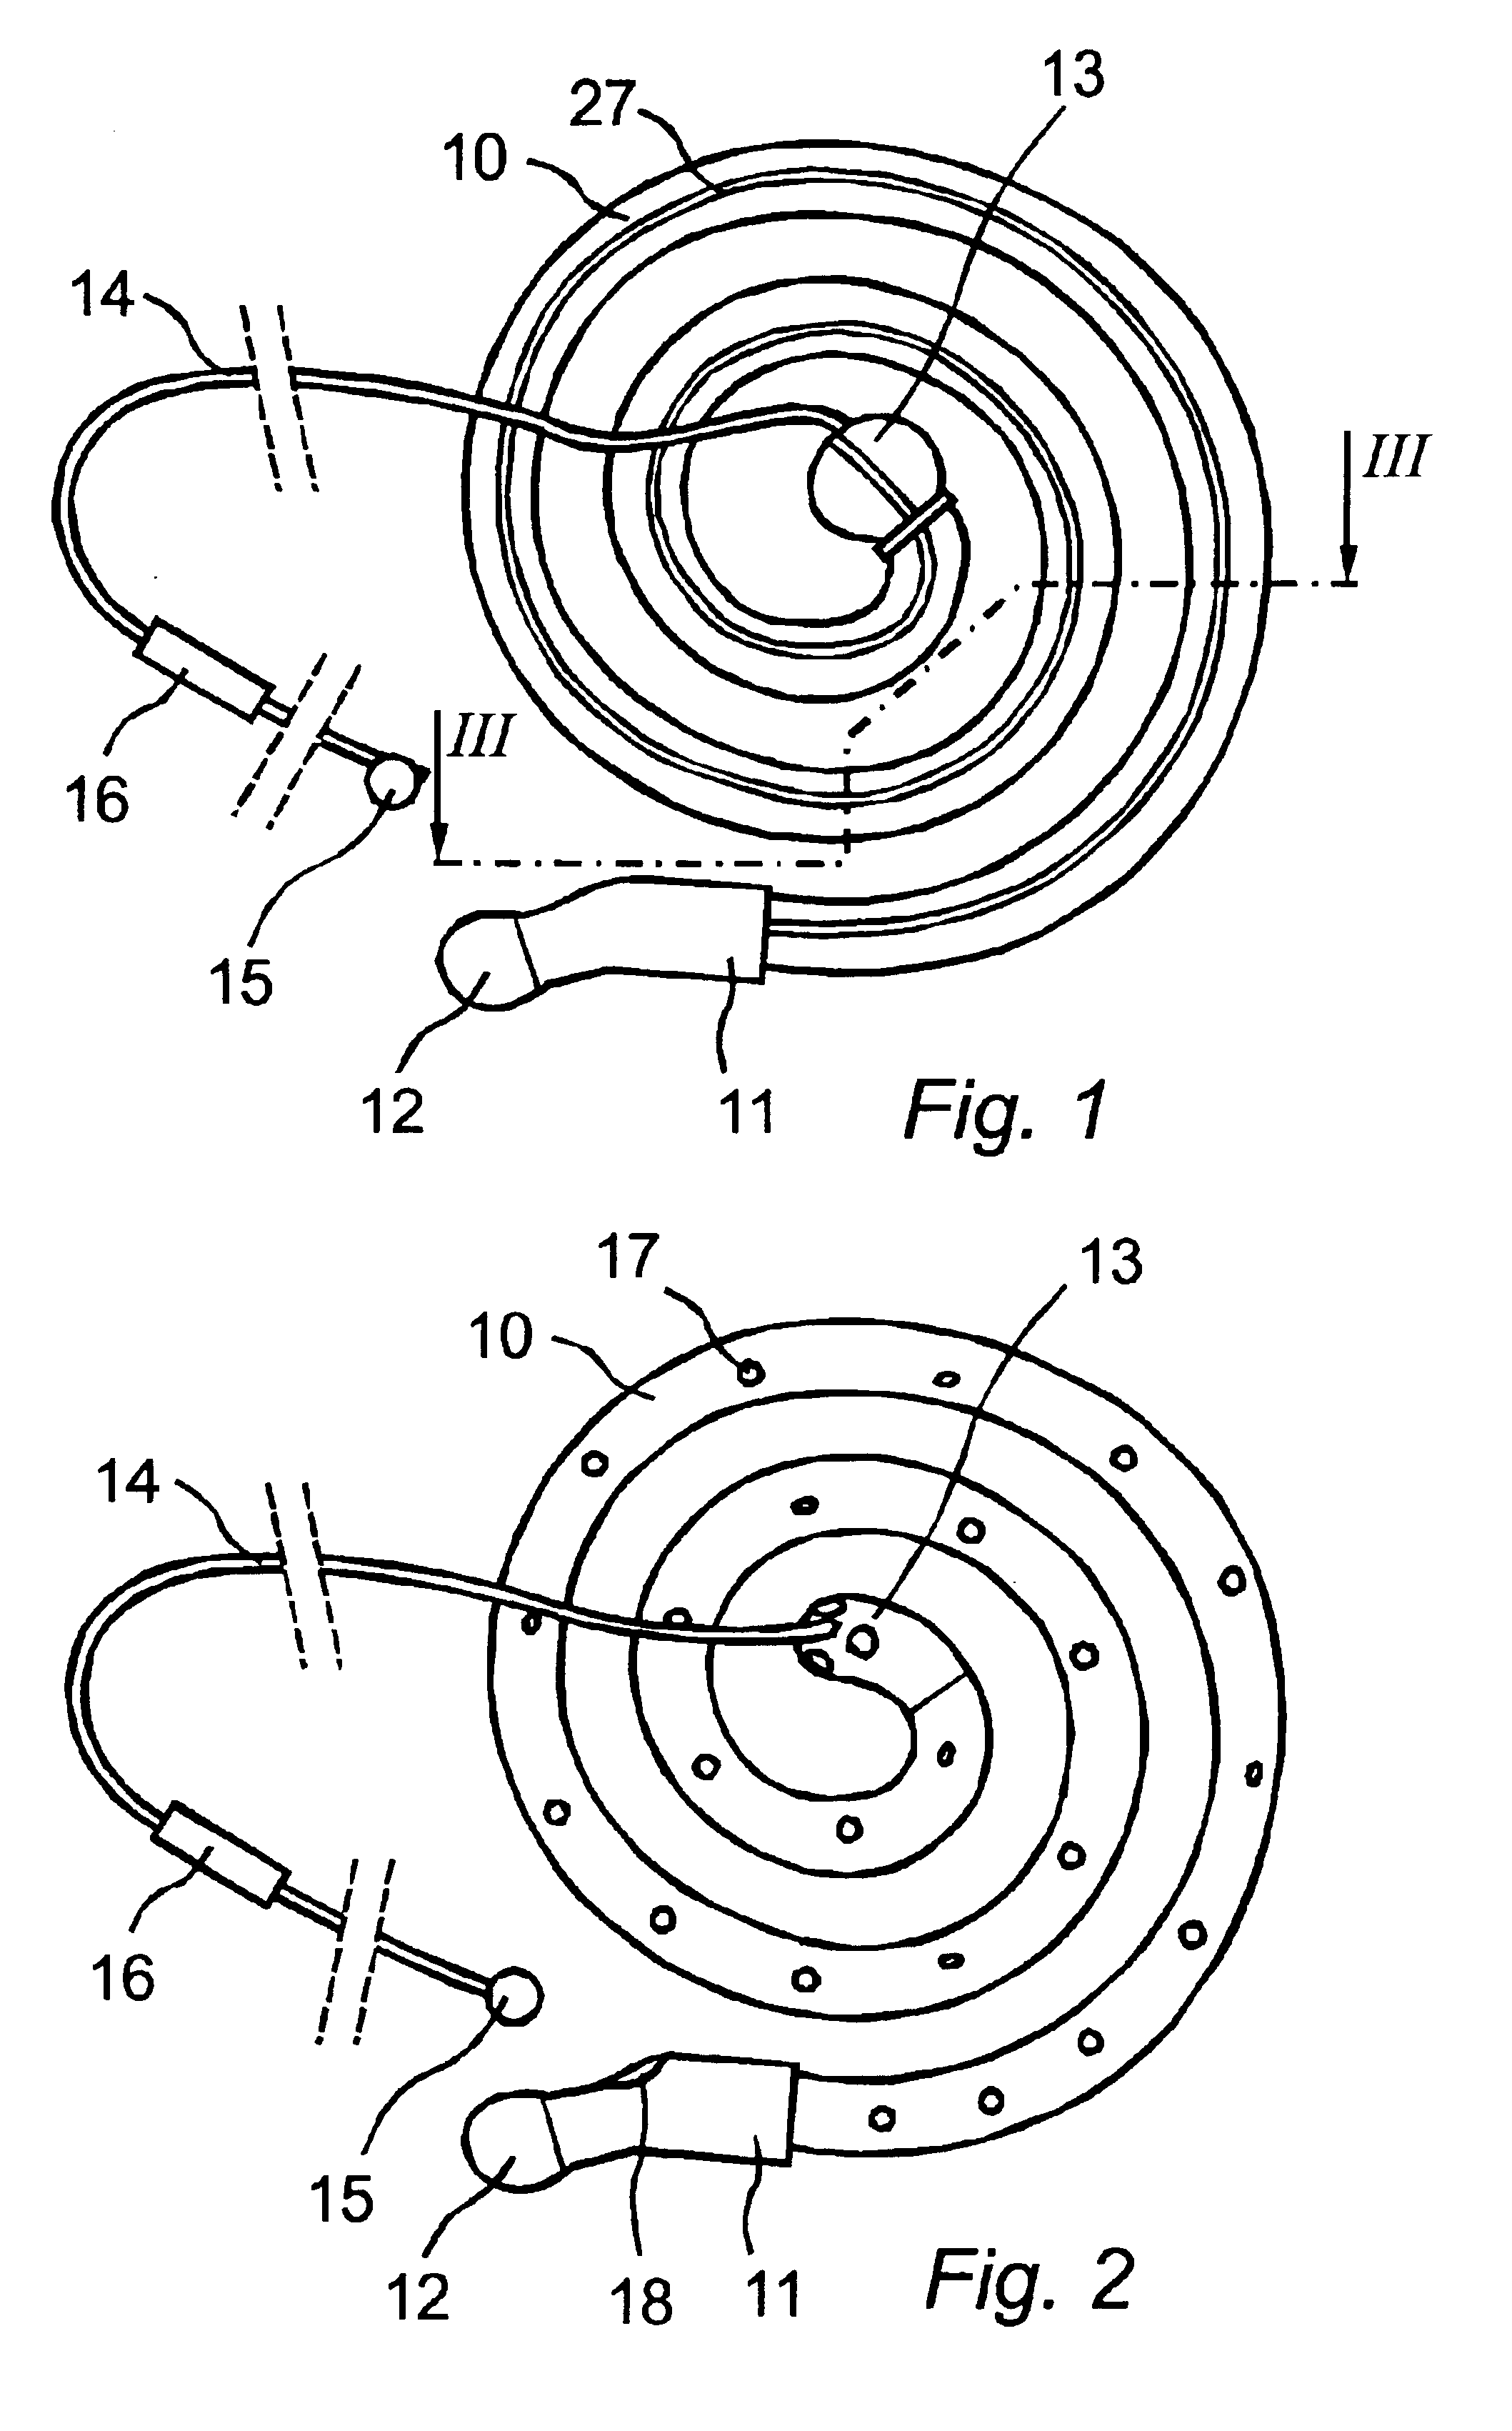 Method and apparatus for insertion of self-draining urine apparatus into bladder